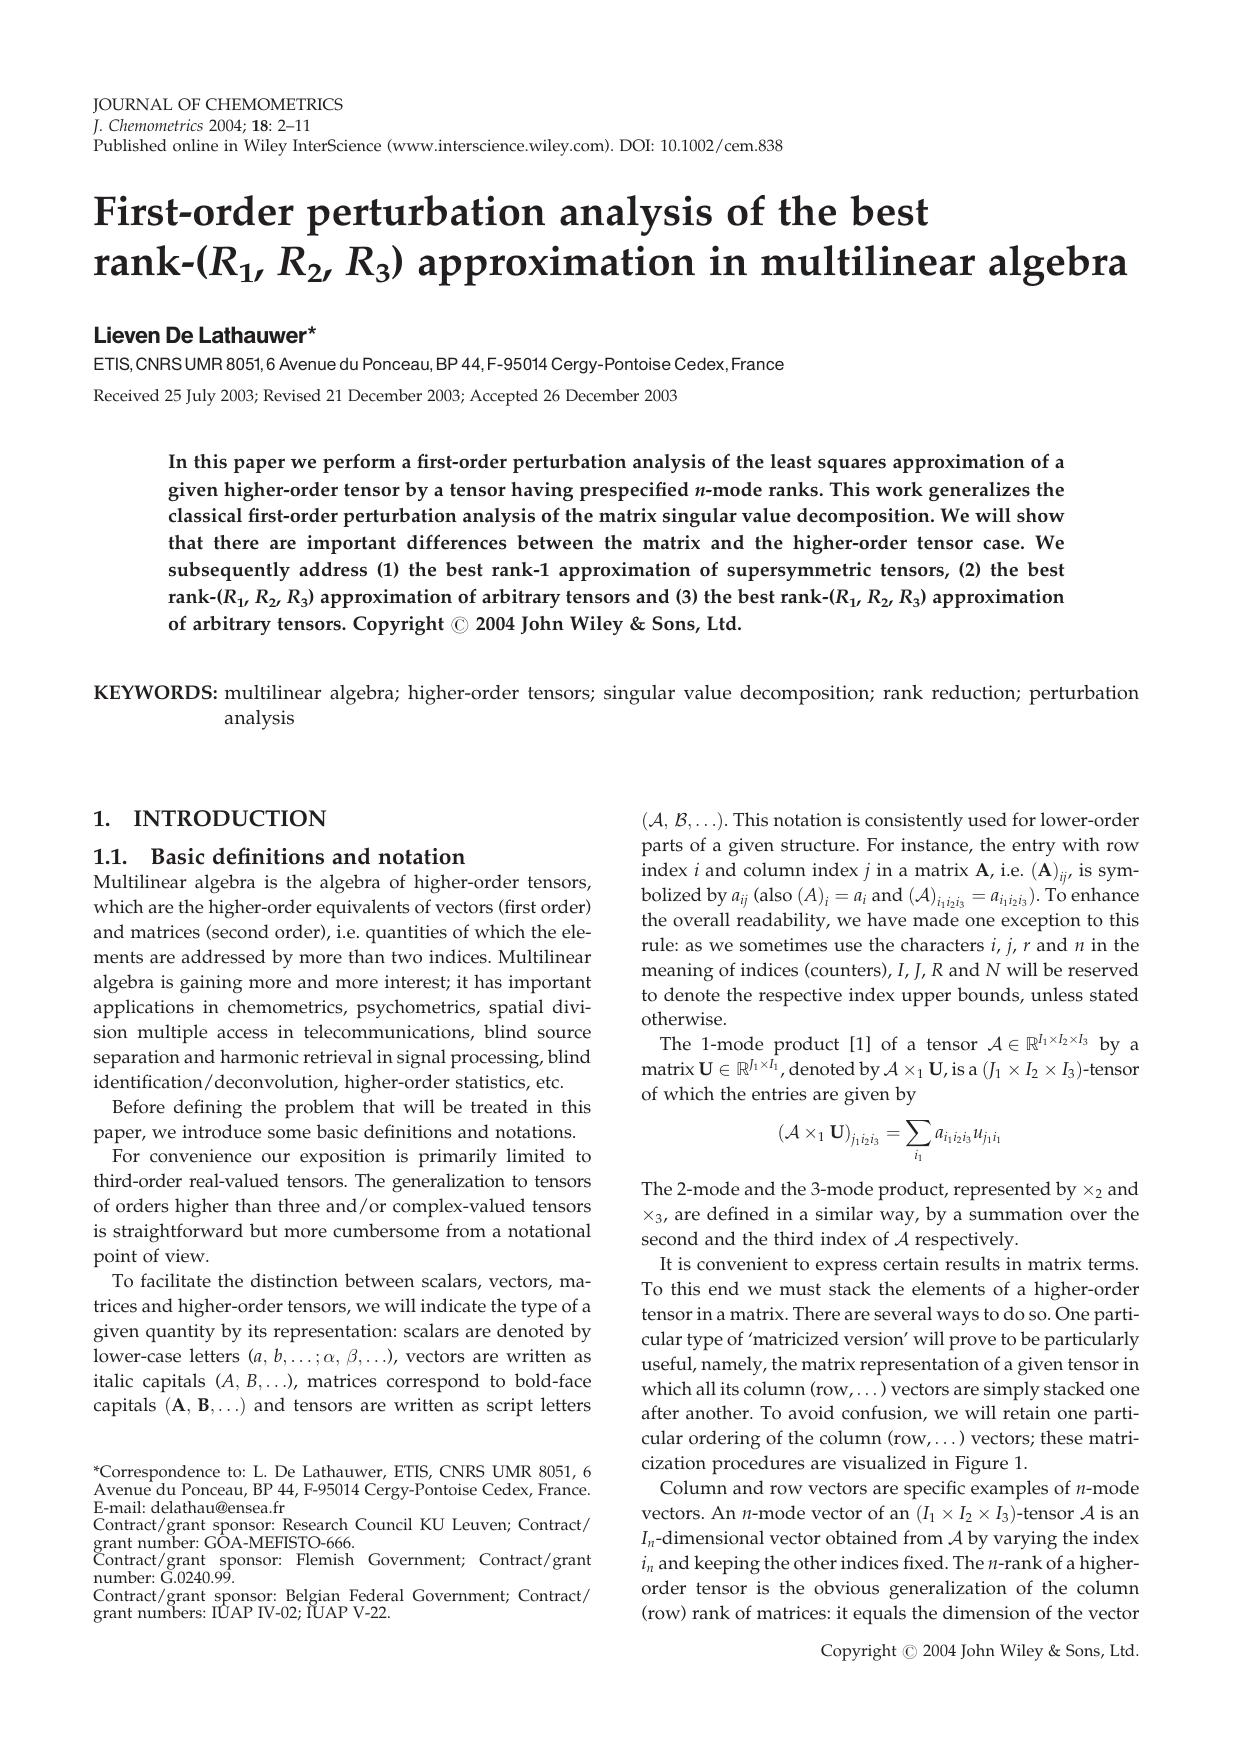 First-order perturbation analysis of the best rank-(R1, R2, R3) approximation in multilinear algebra by Unknown